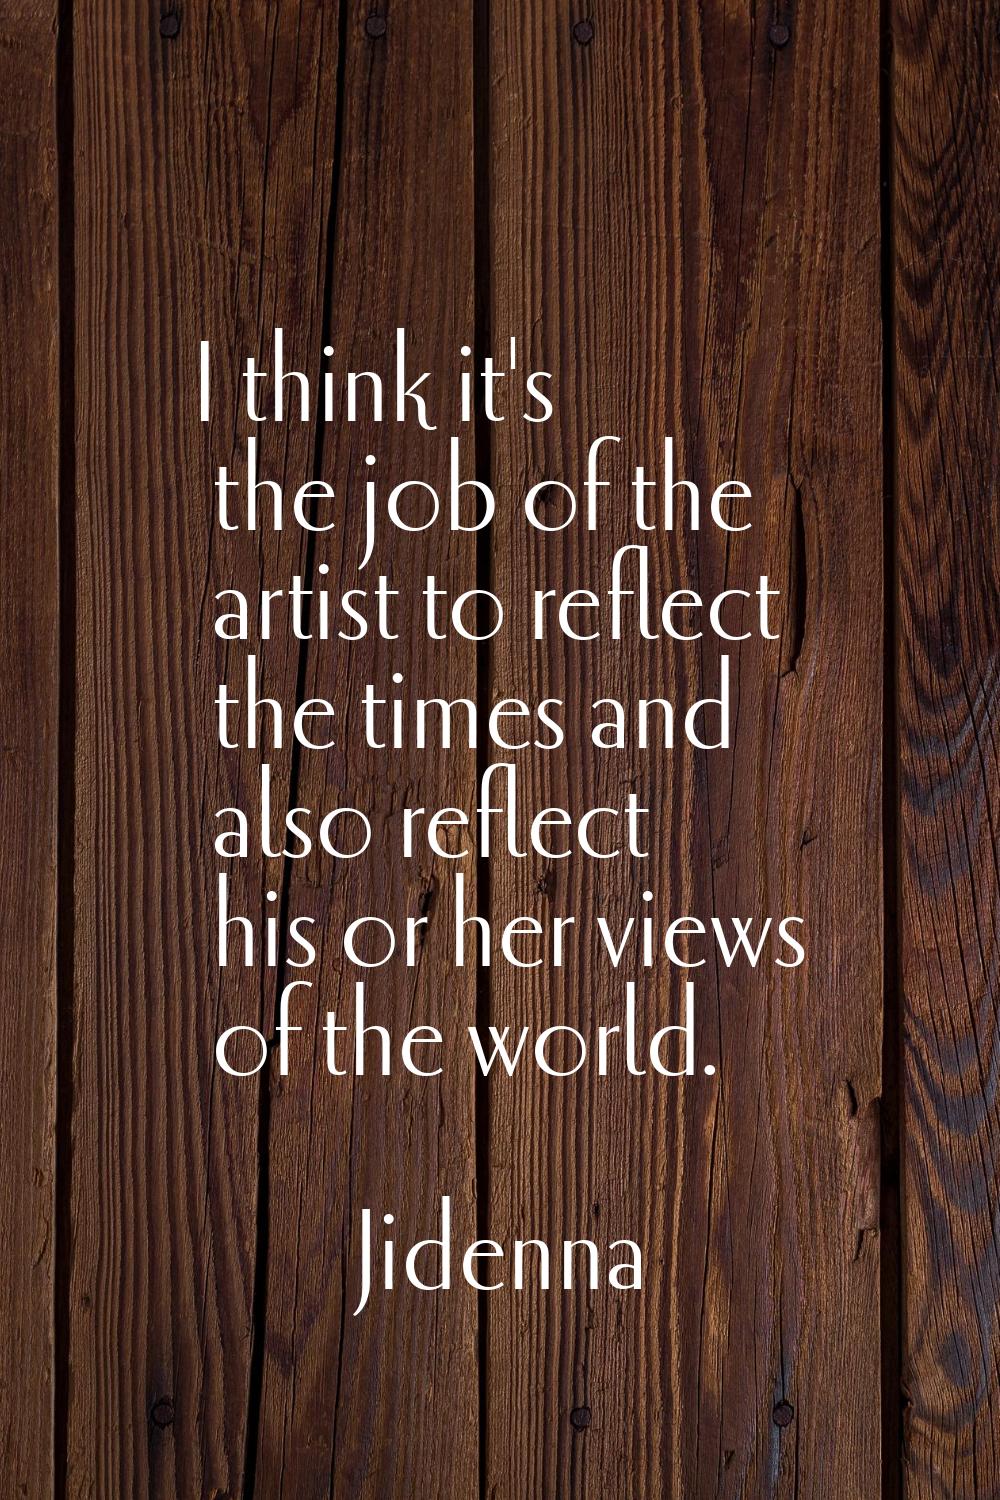 I think it's the job of the artist to reflect the times and also reflect his or her views of the wo